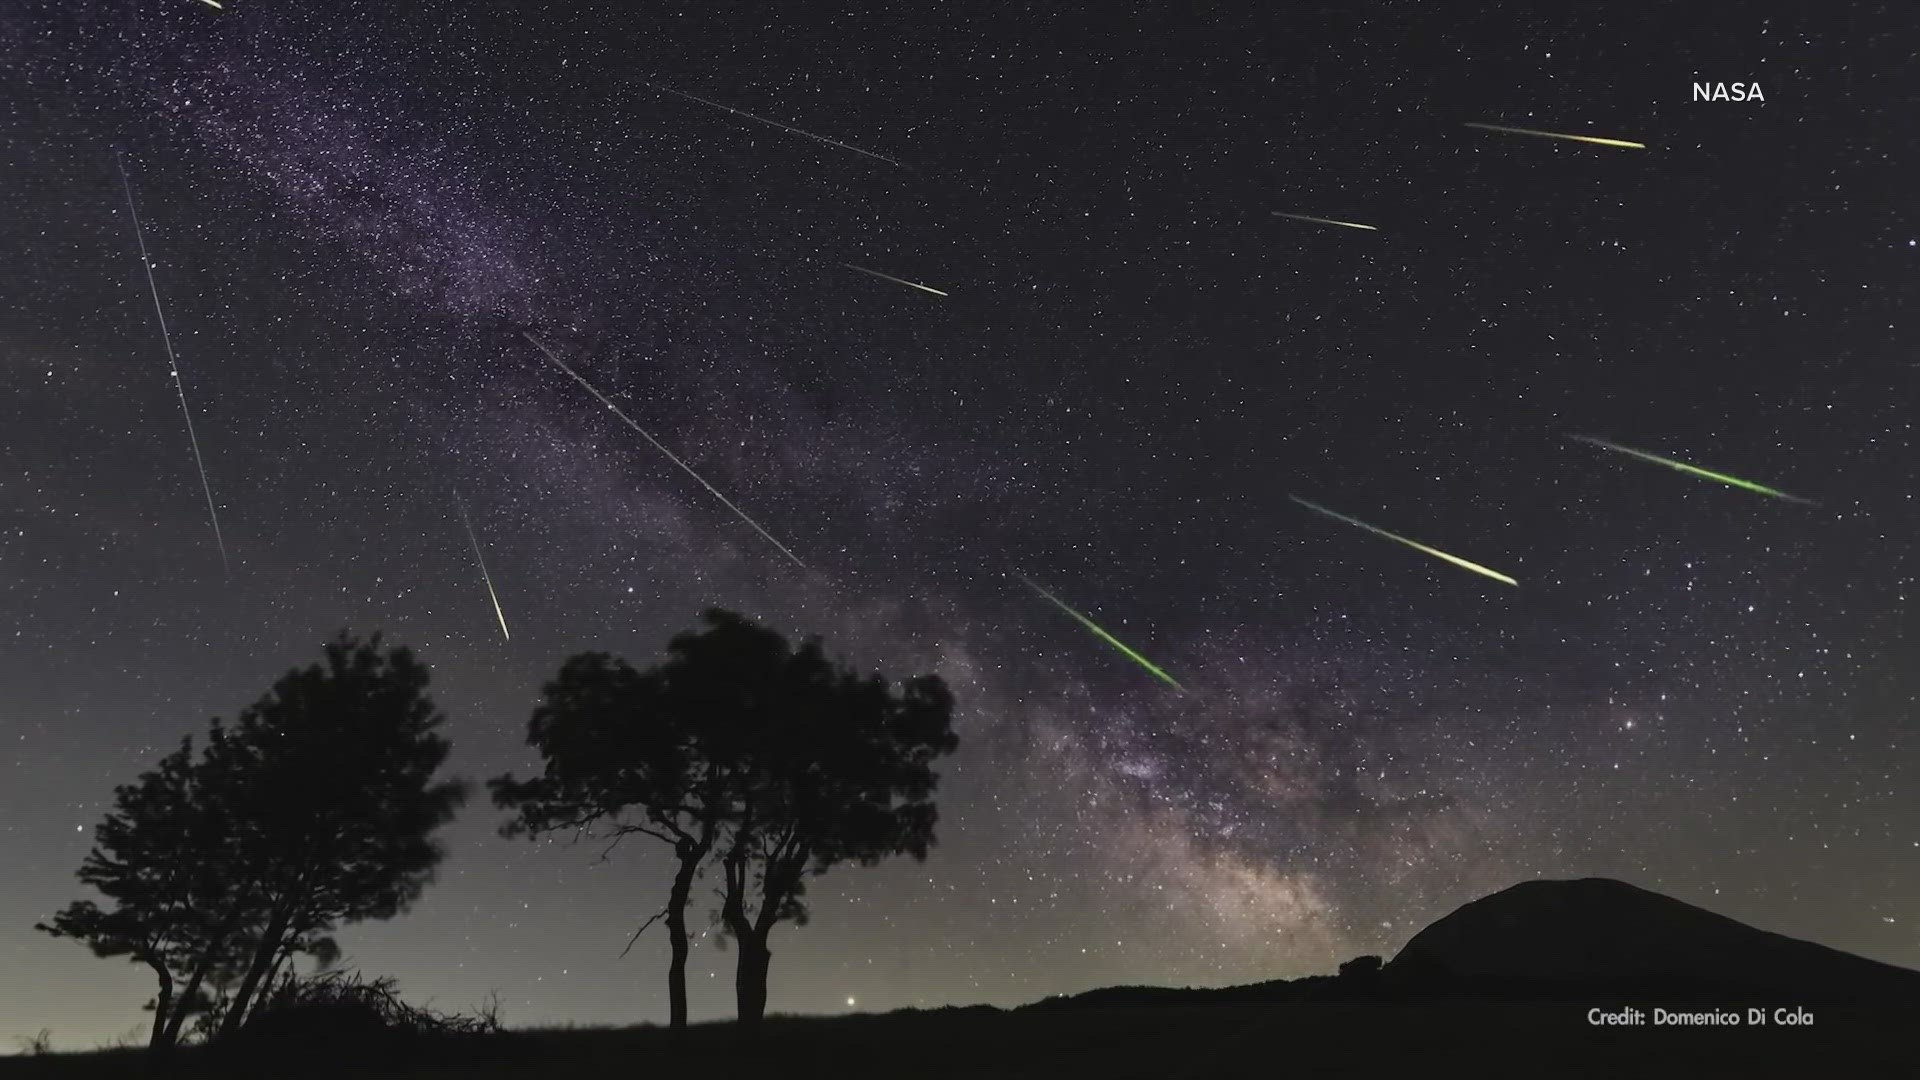 With the moon only at 10% brightness, conditions should be great to see plenty of meteors.